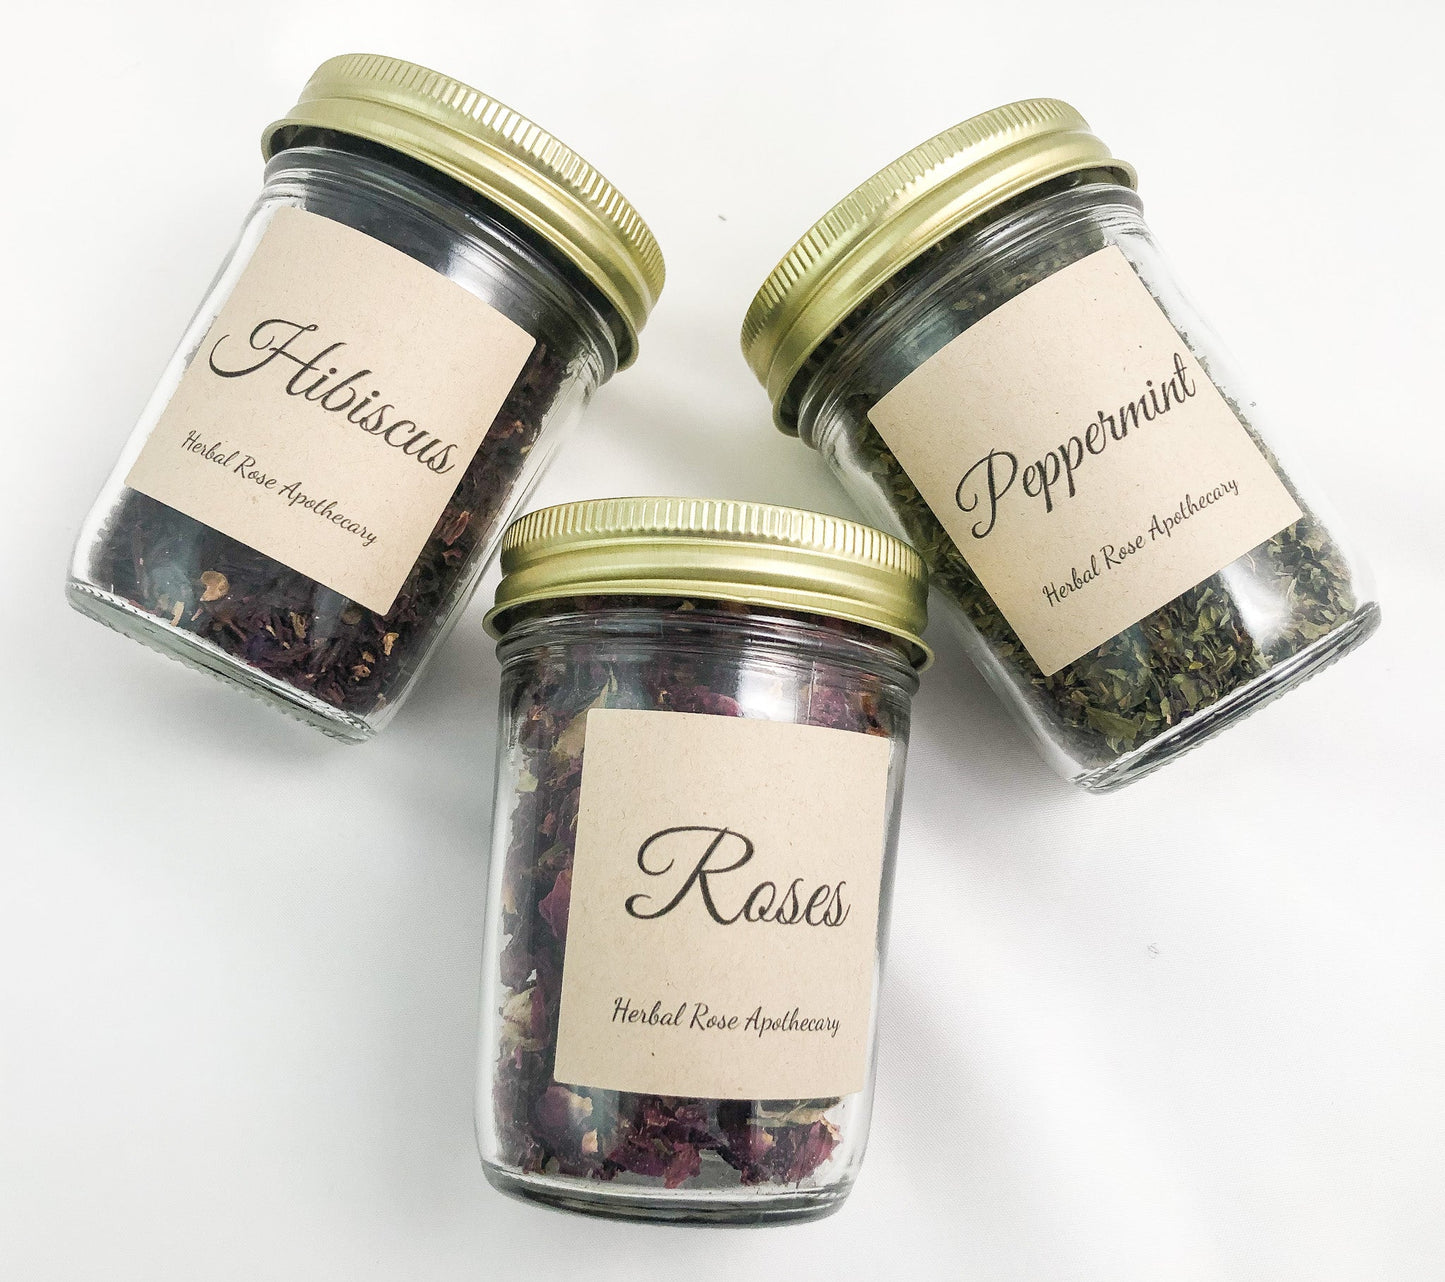 Ariel view of 3 clear glass jars filled with dried herbs laying on white background